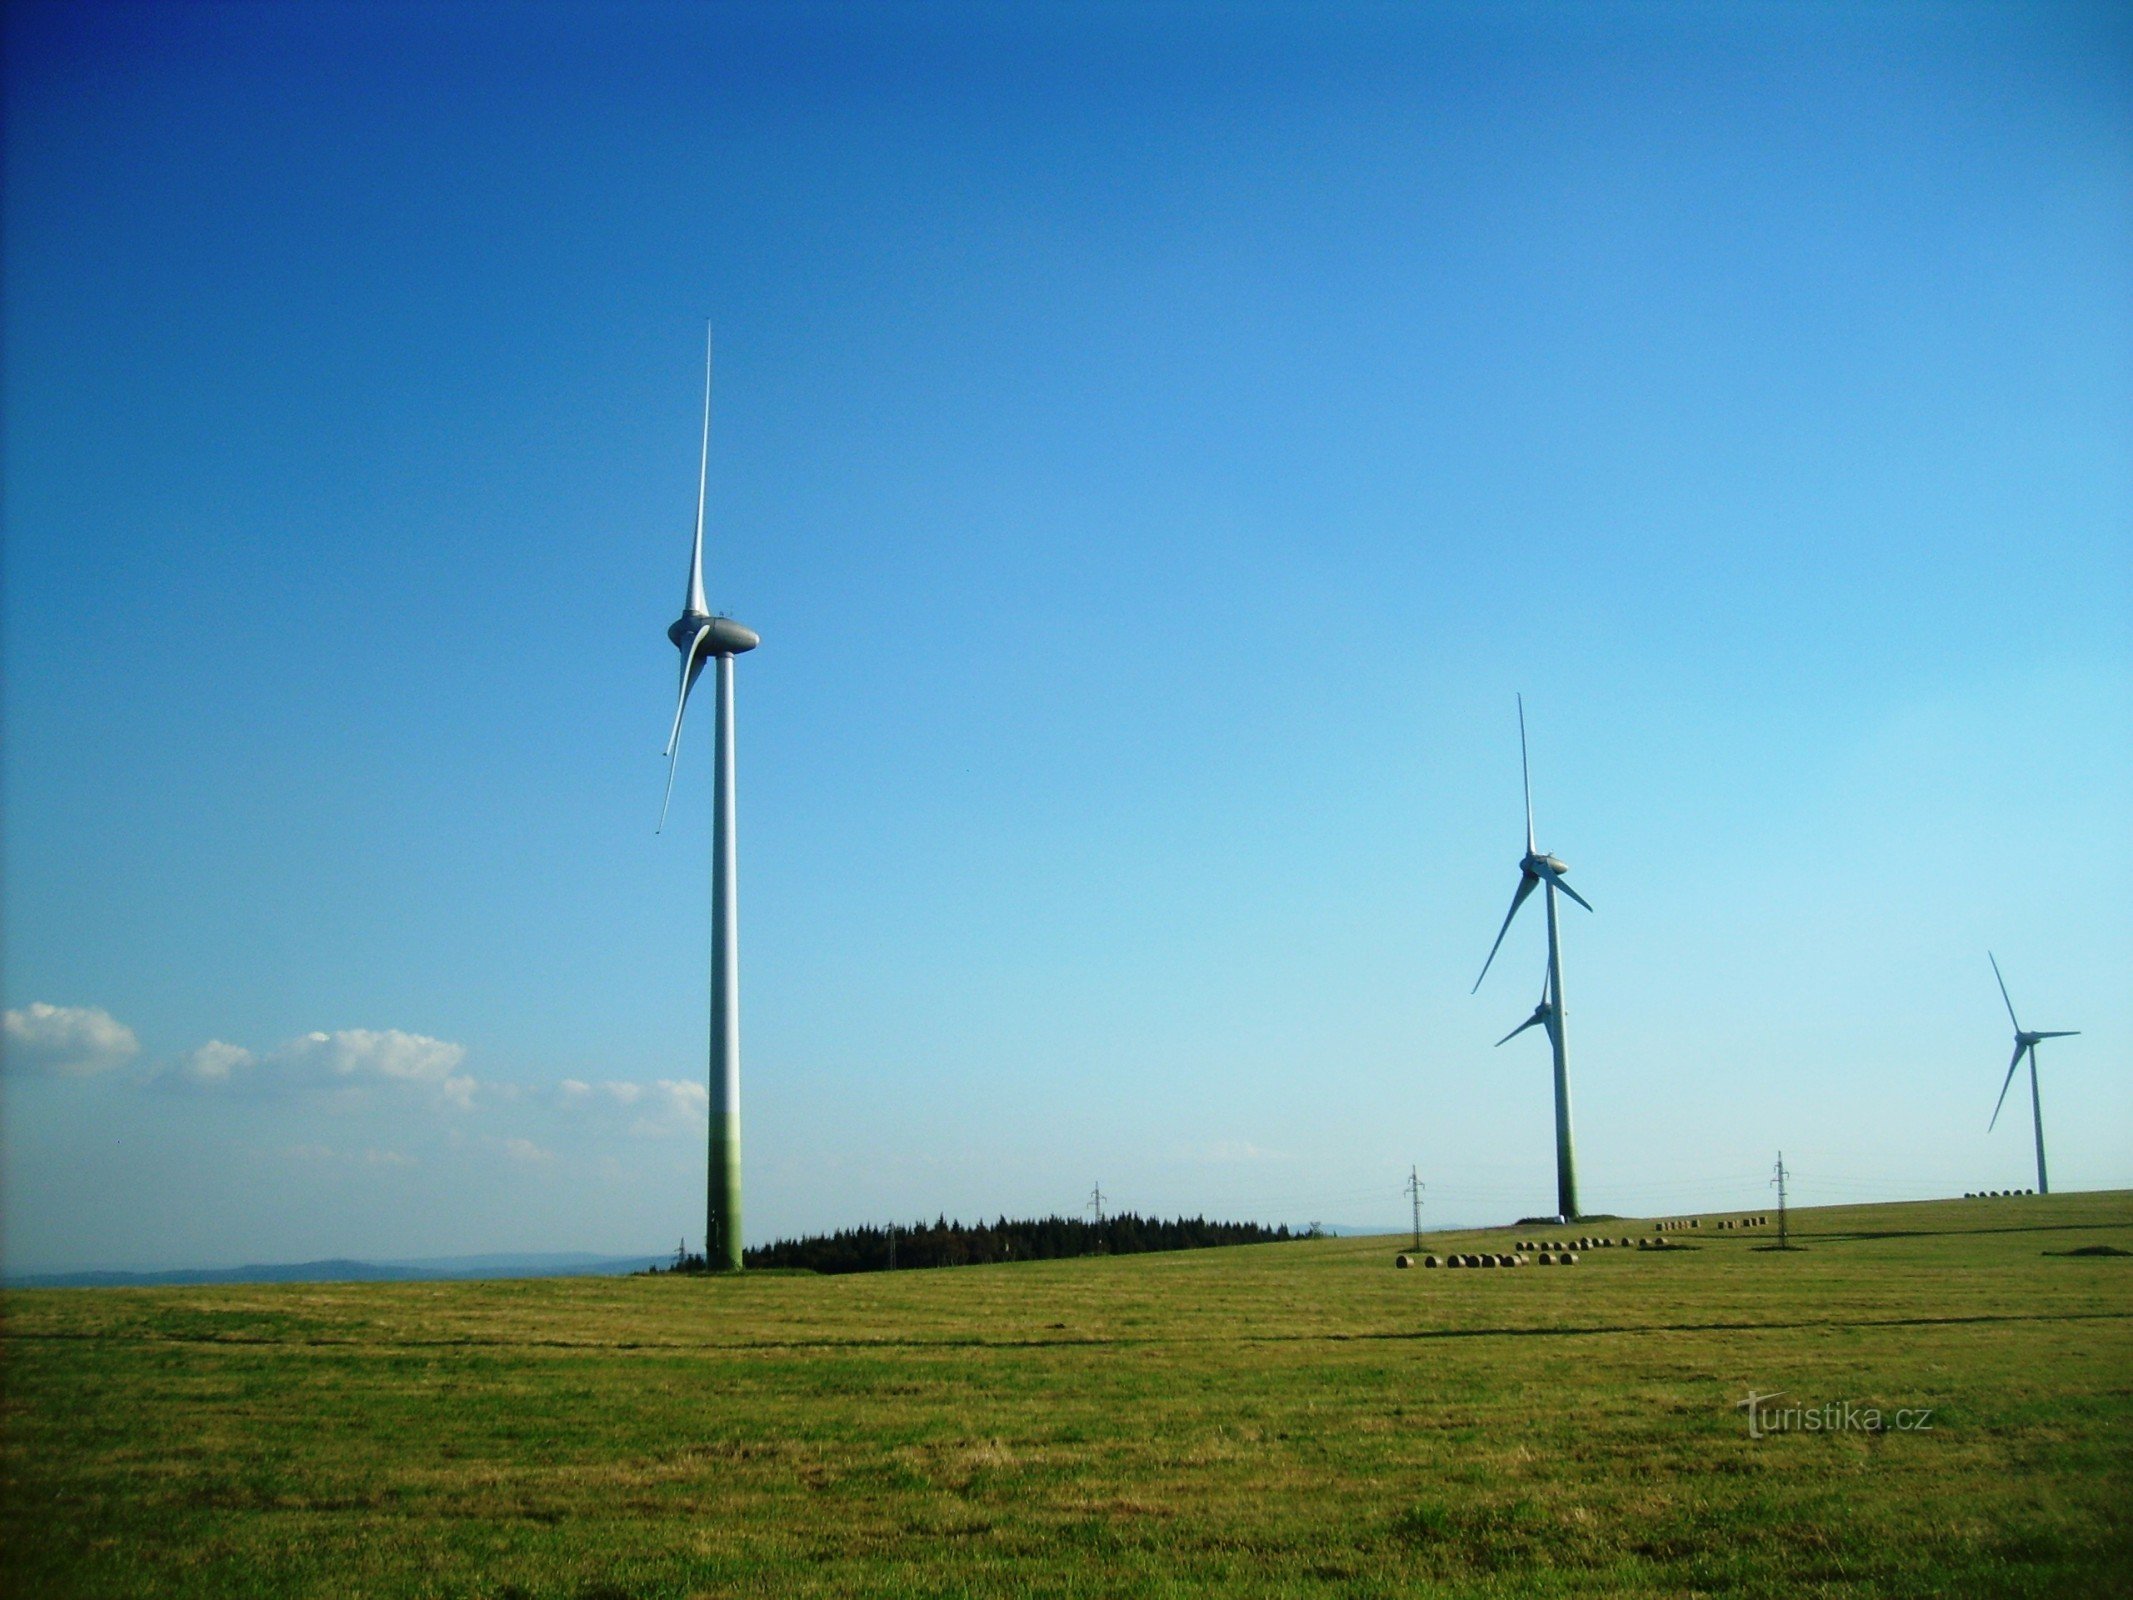 view of part of the wind farm